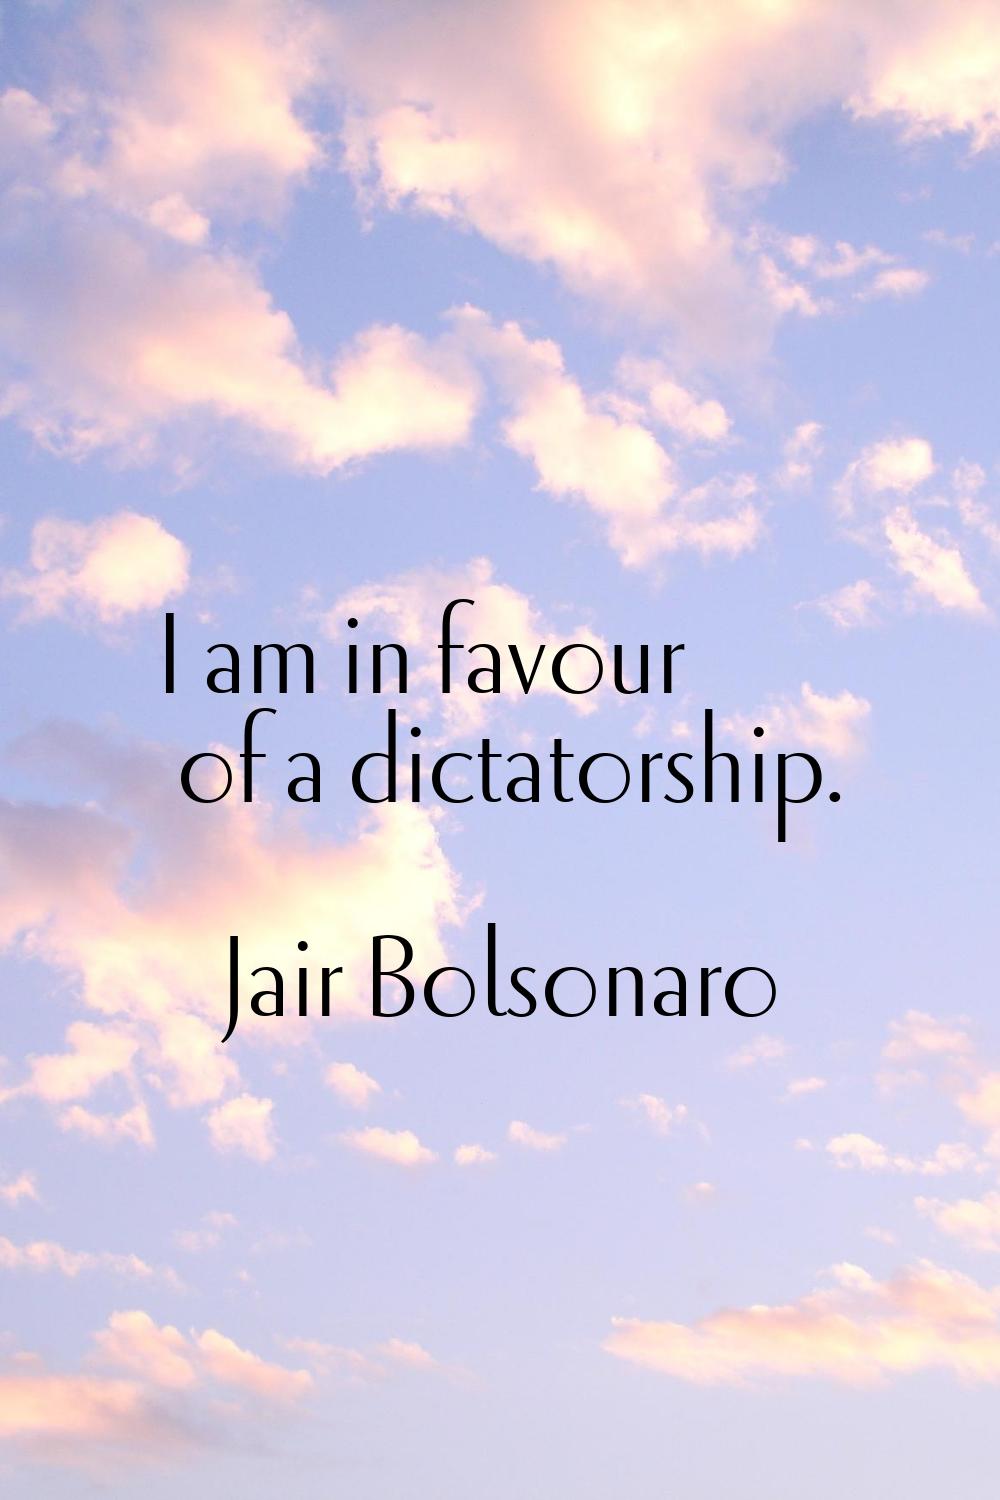 I am in favour of a dictatorship.